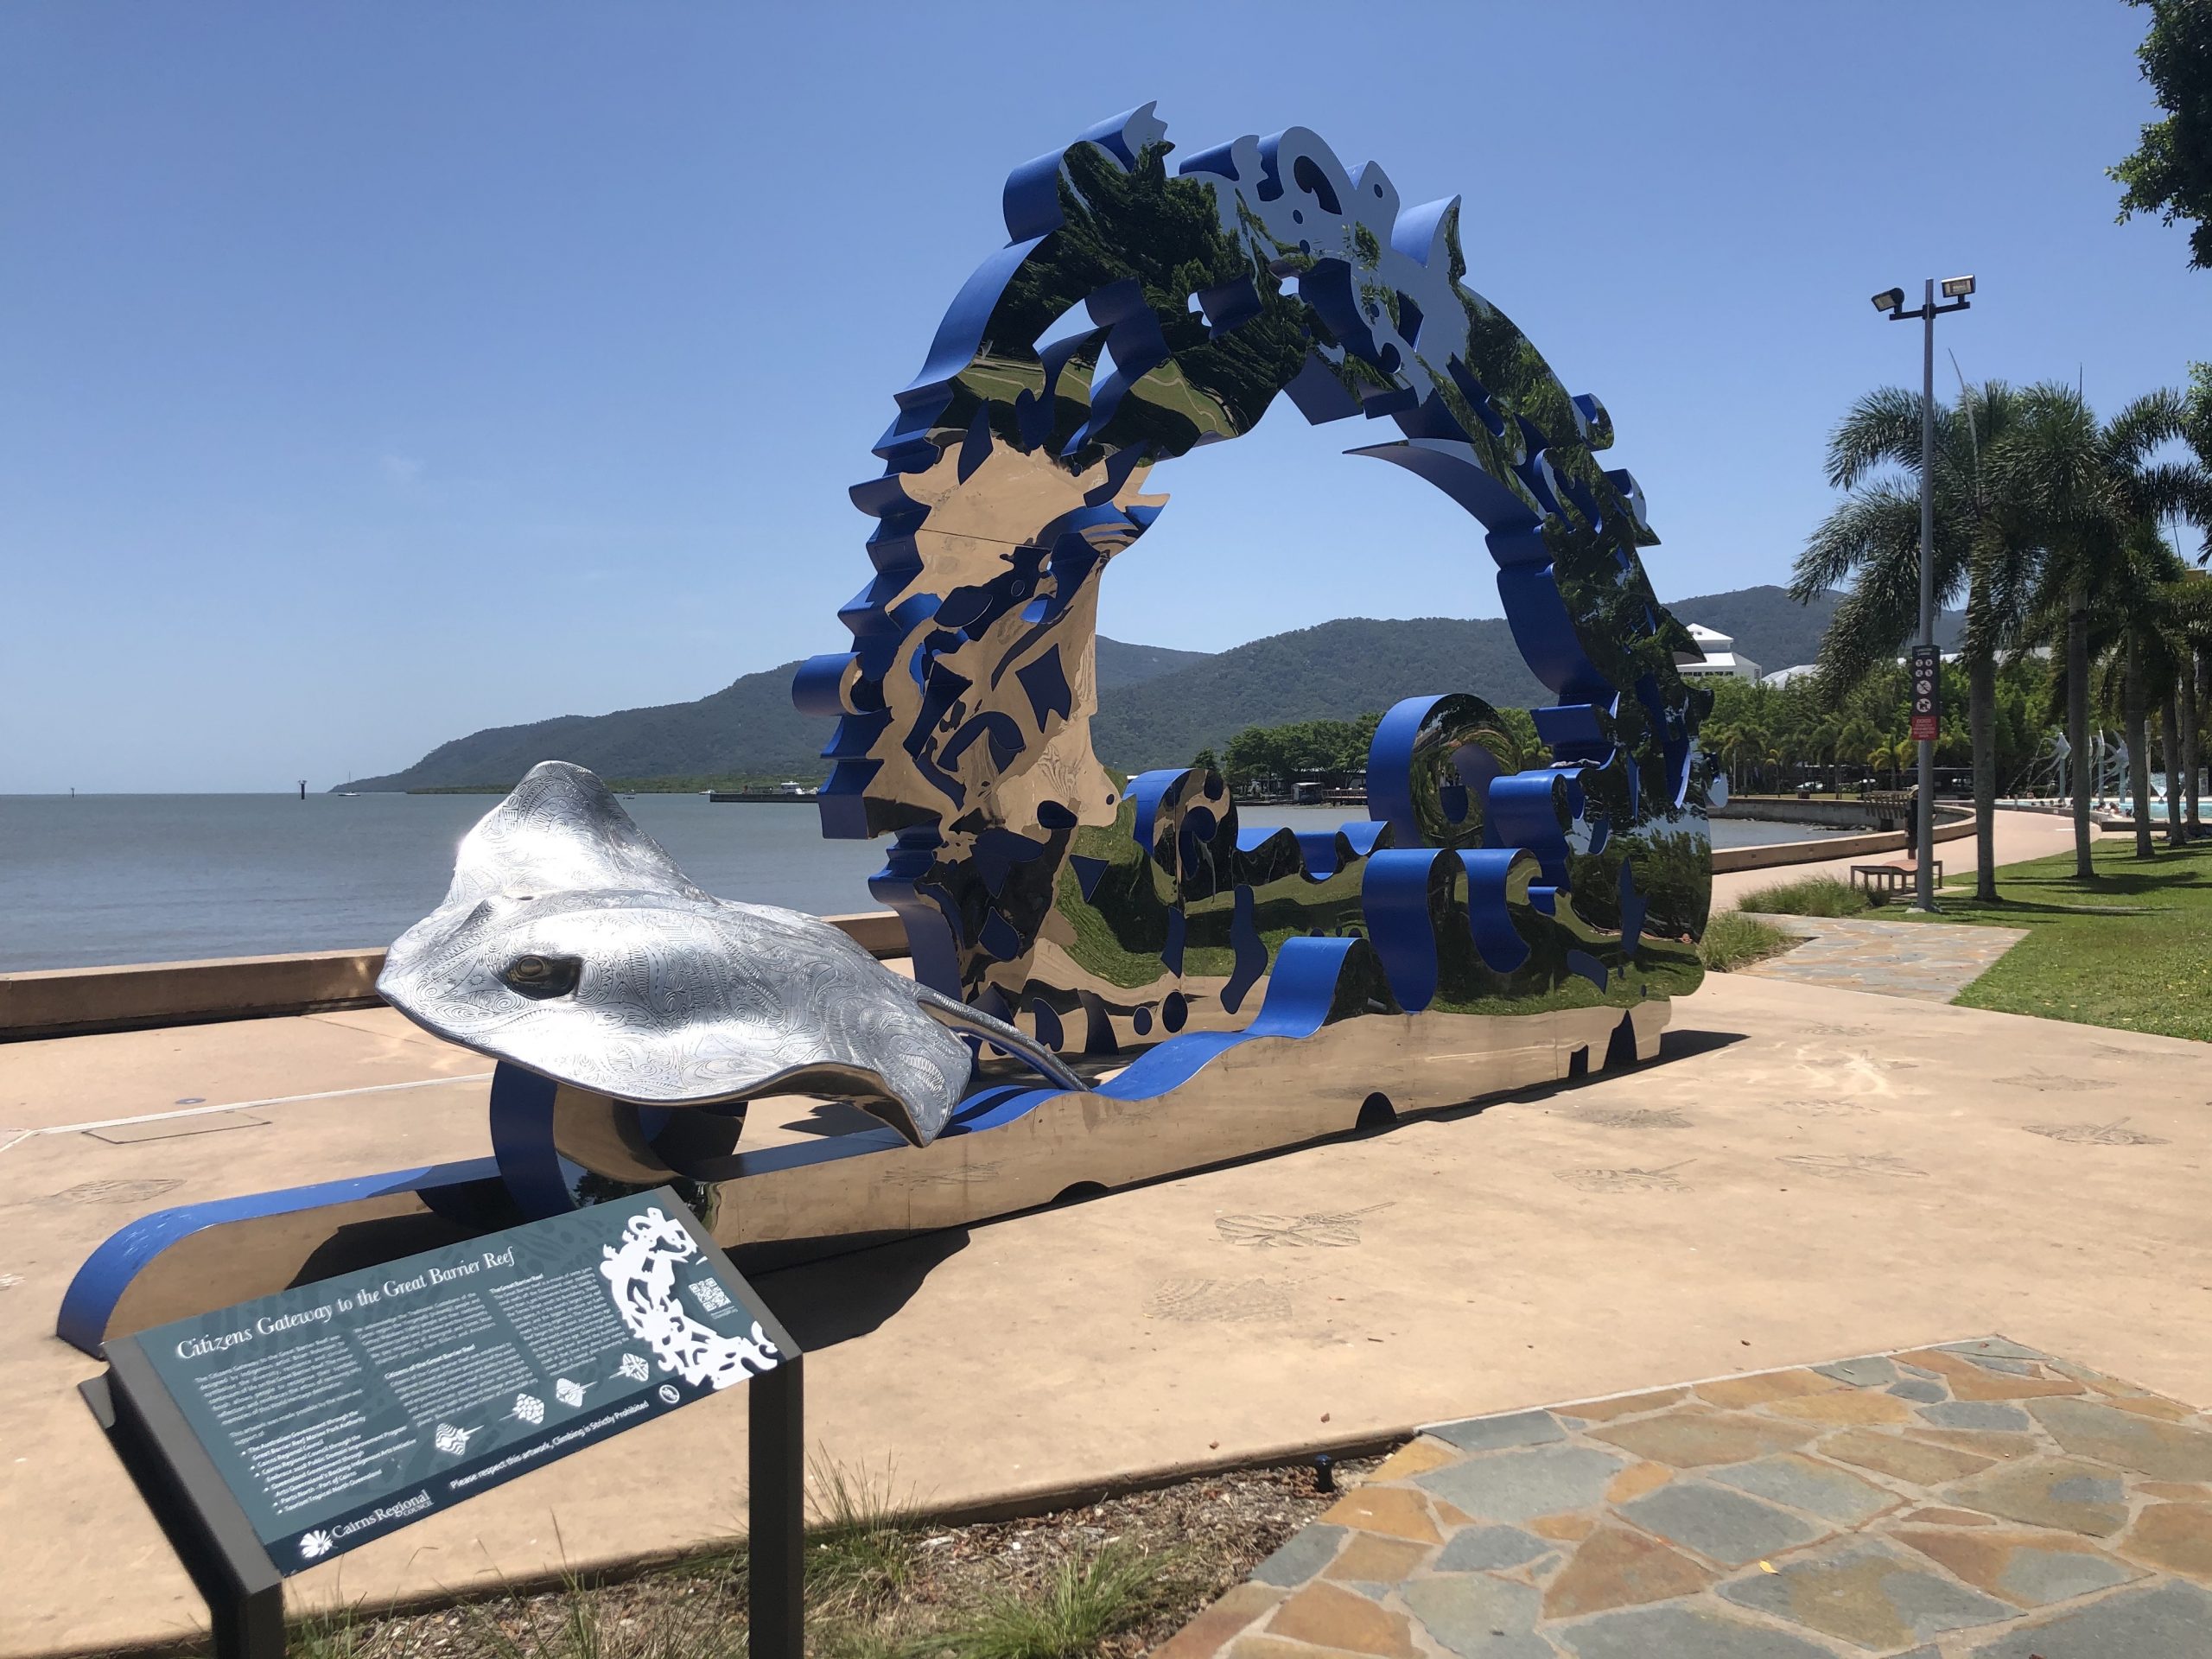 The Cairns city esplanade: a large metal sculpture in front of the ocean, which serves as the gateway to the great barrier reef.